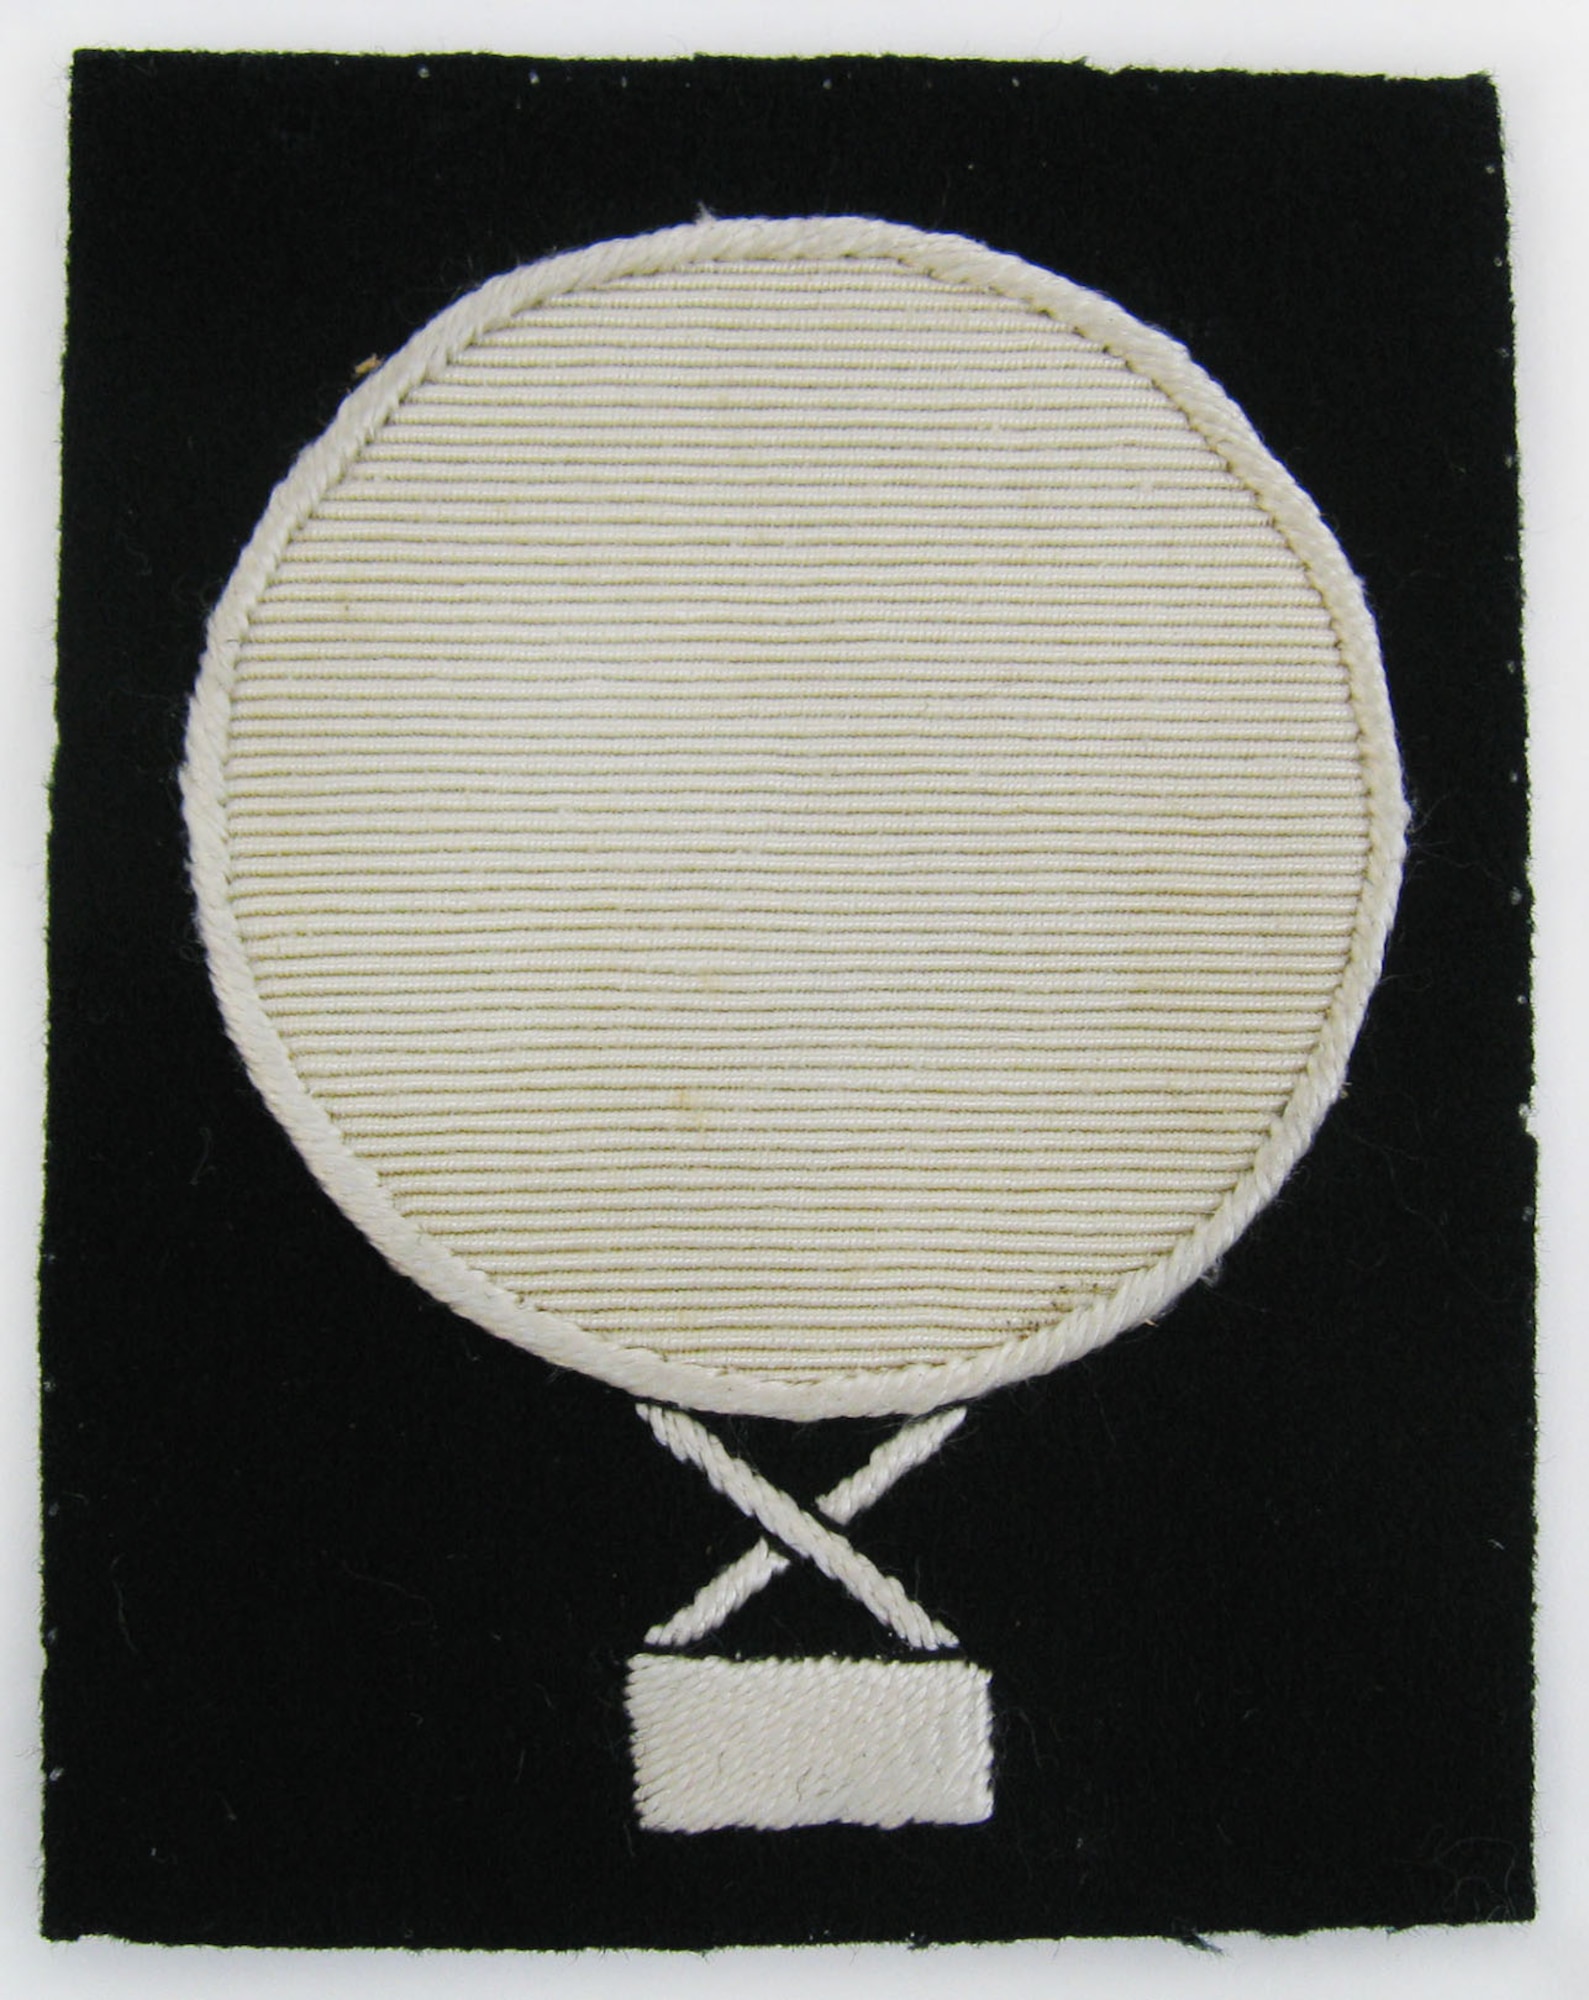 This insignia was worn by U.S. balloon mechanics in the Air Service's Balloon Section during World War I. U.S. balloon mechanics were trained in Europe by specialists from French balloon units, which had been in service for approximately 10 years prior. Maintaining balloons was an important requirement, as balloons were used in WWI primarily for day and night observation (locating targets and tracking activity behind enemy lines), as well as regulating artillery fire. (U.S. Air Force photo)